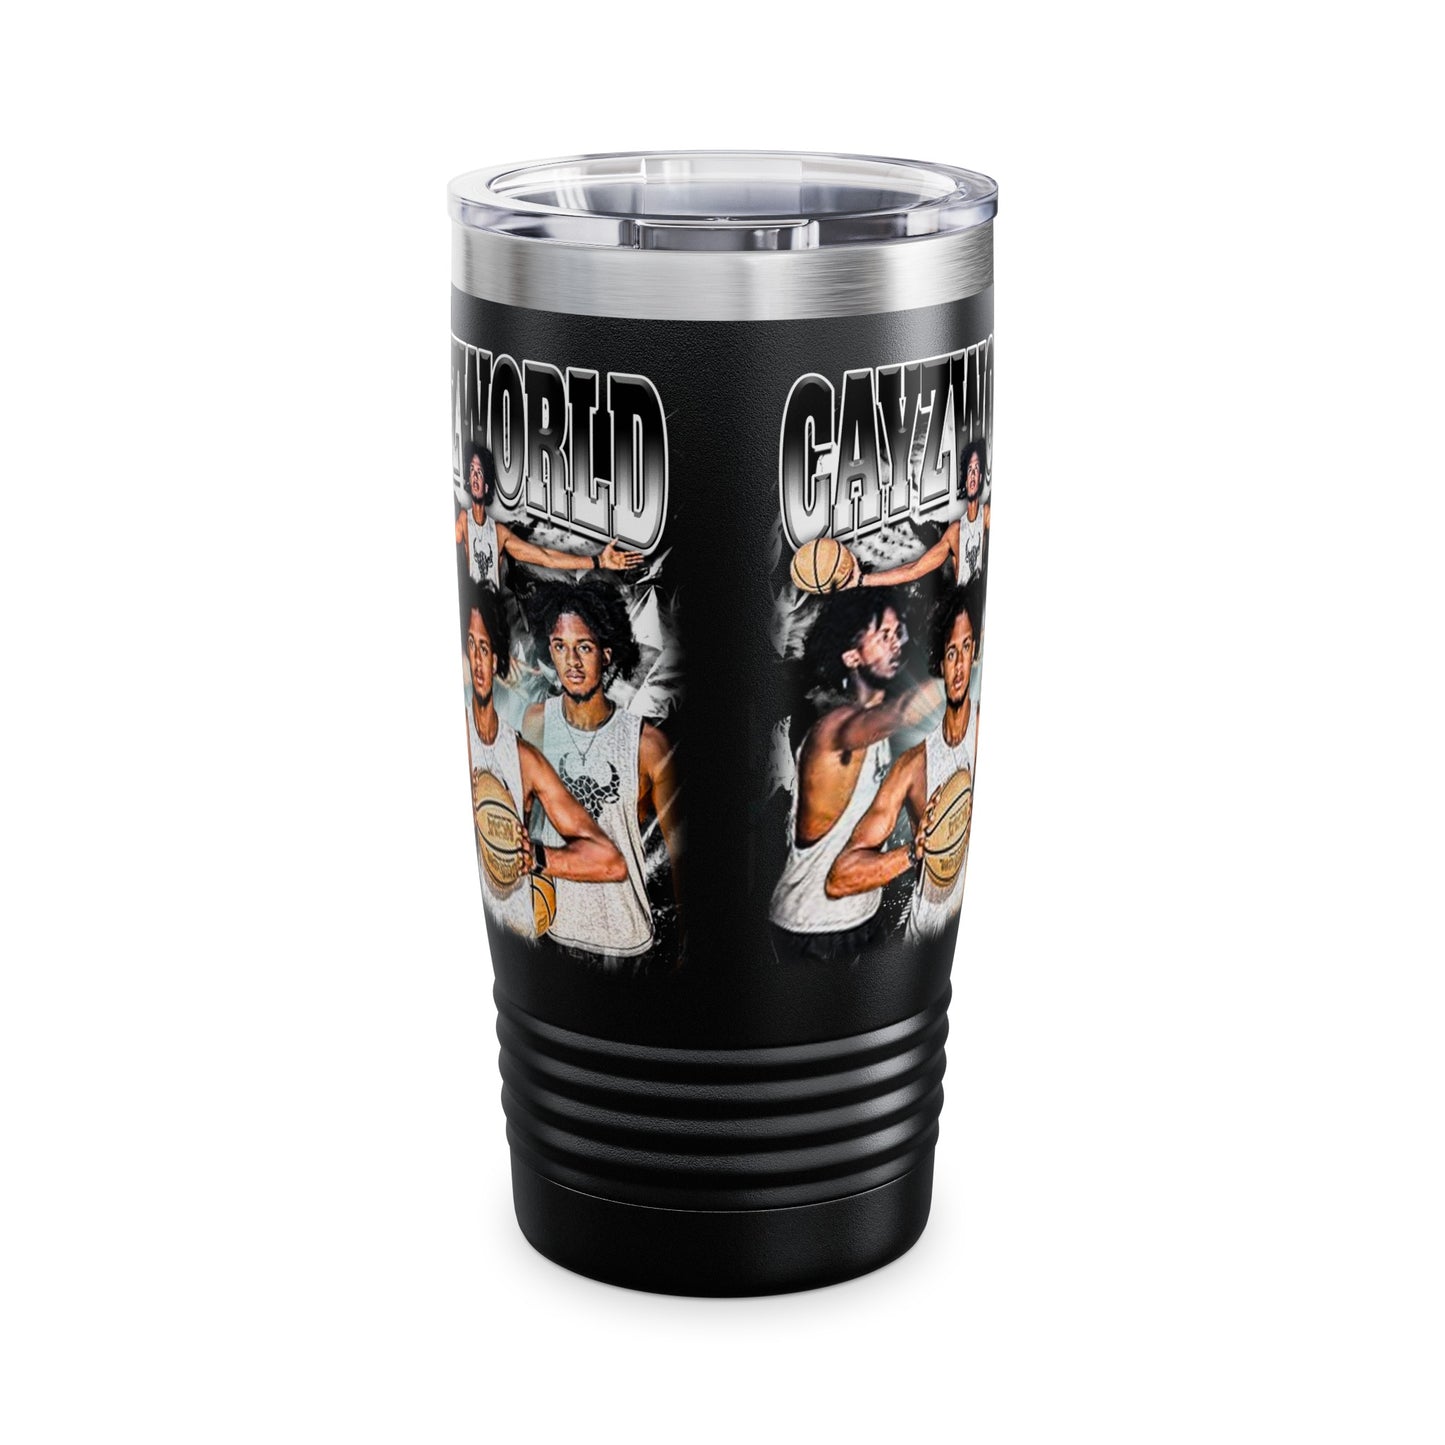 Cayzworld Stainless Steal Tumbler